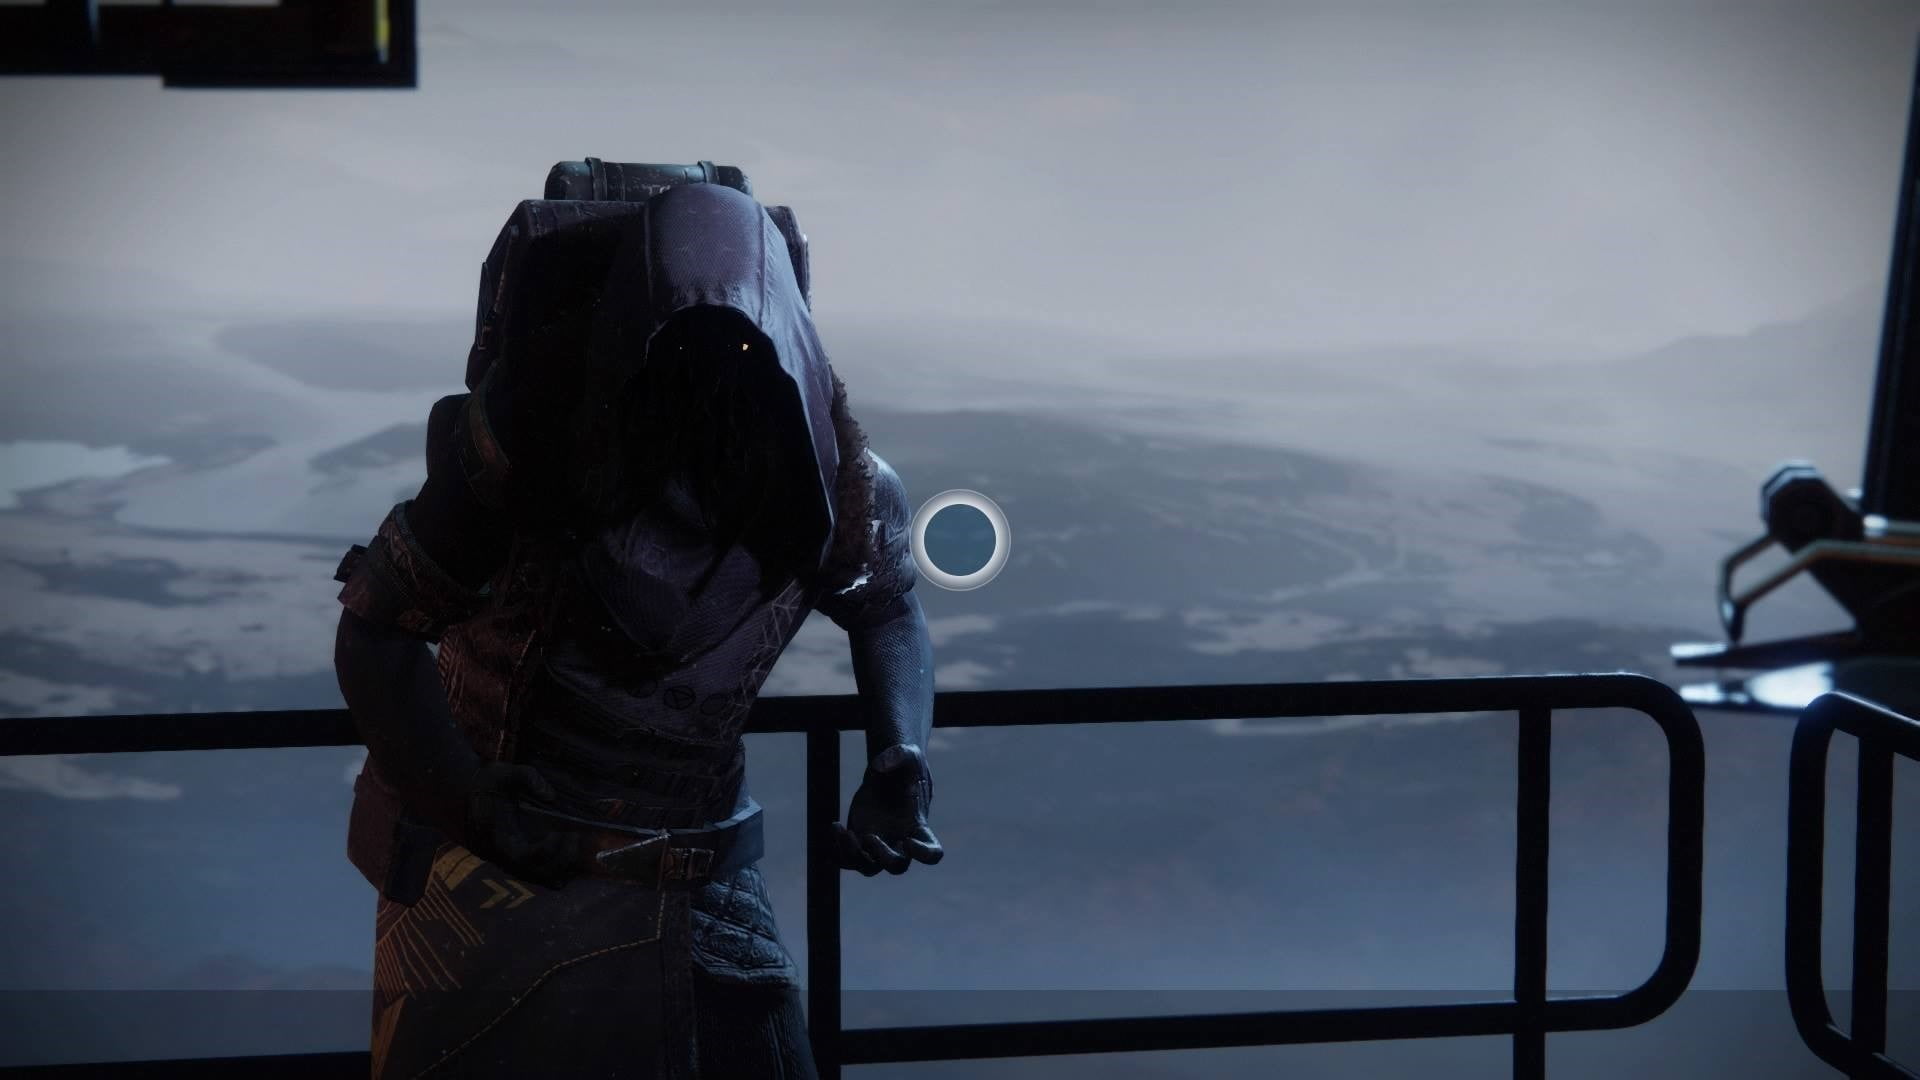 Destiny 2 Xur Inventory – Coldheart, Wormhusk Crown, Stronghold, and More